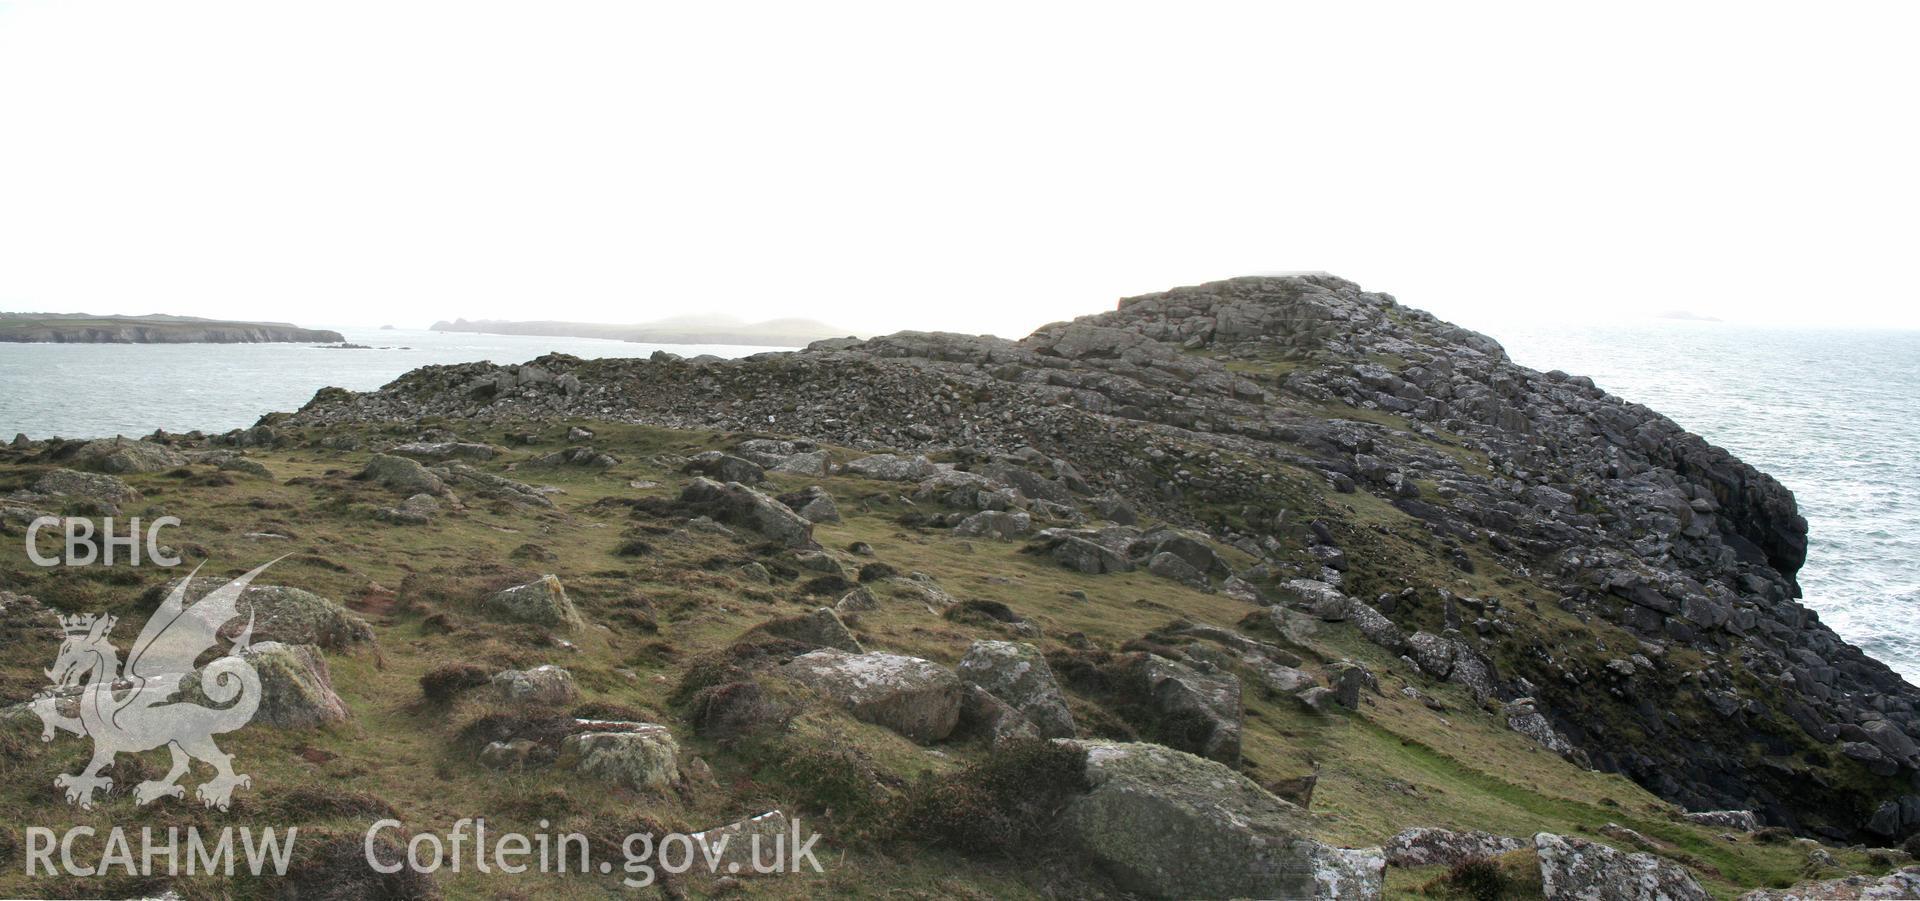 Clawdd y Milwyr promontory fort. Panorama of promontory defences from outside the fort to the east.